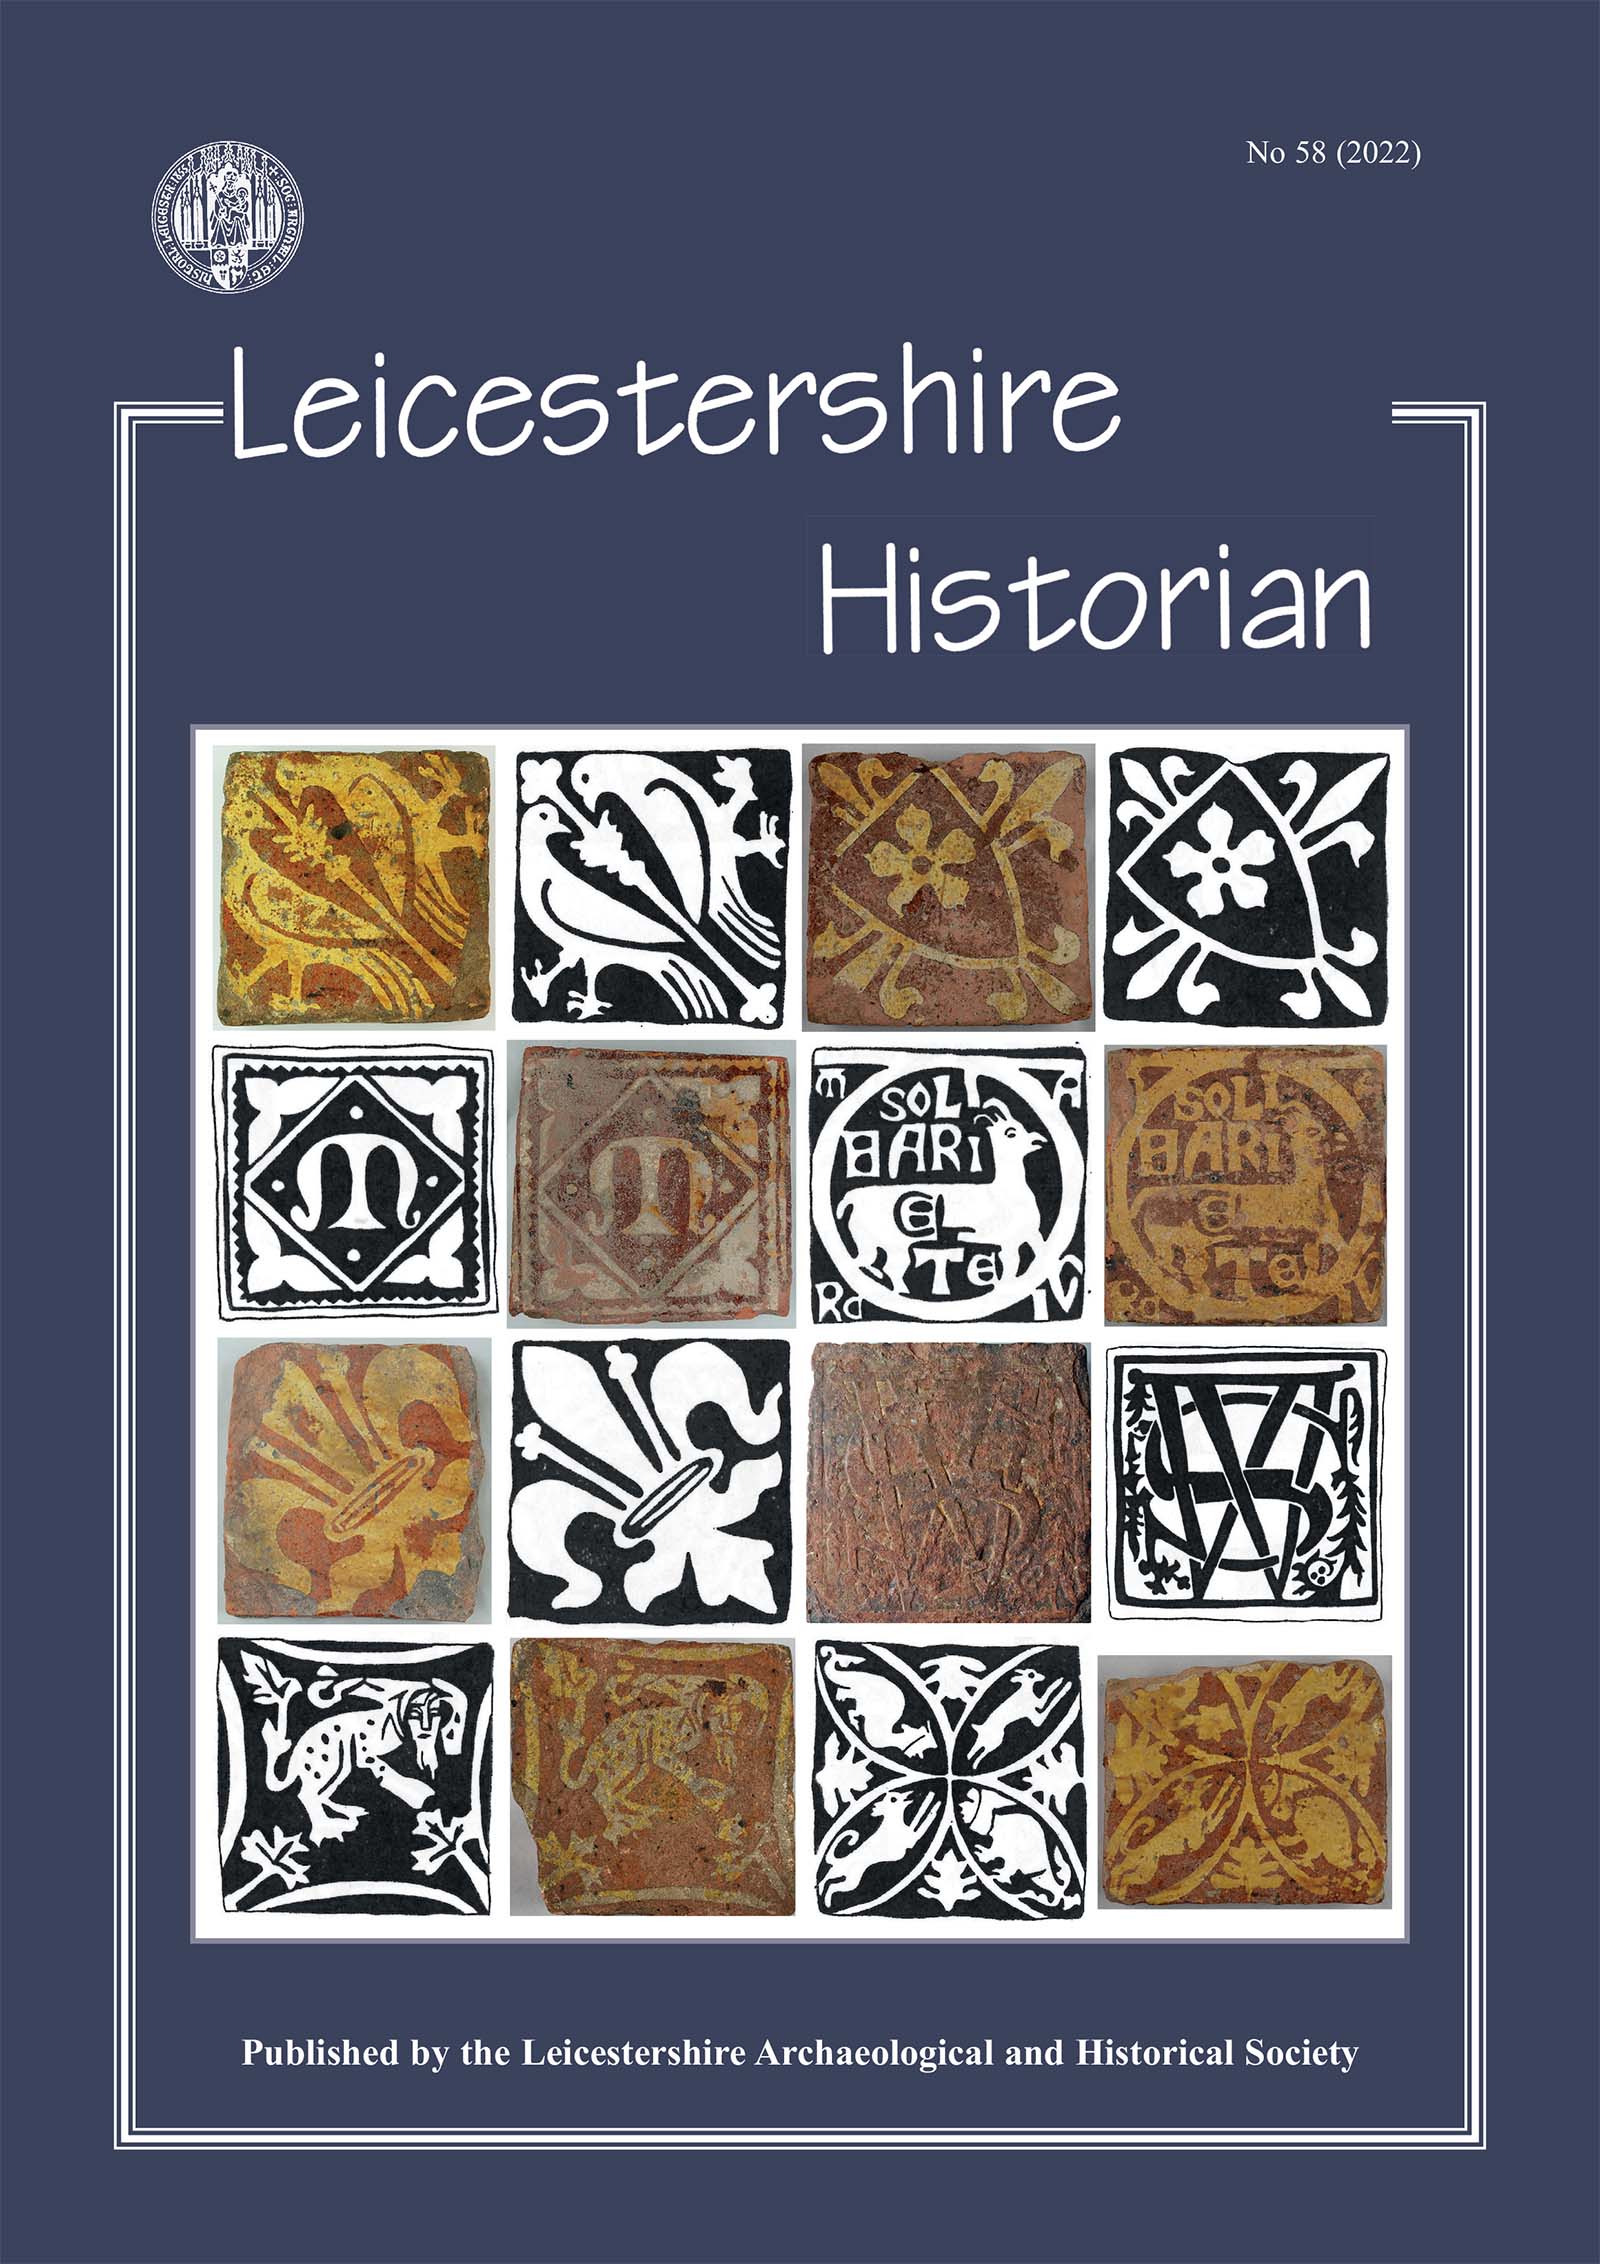 Medieval floor-tiles from Leicestershire County Council Museum Collections (© Leicestershire County Council Museums) pictured alongside their equivalent Norma Whitcomb illustrations (© Norma R. Whitcomb) from The Medieval Floor-Tiles of Leicestershire. 